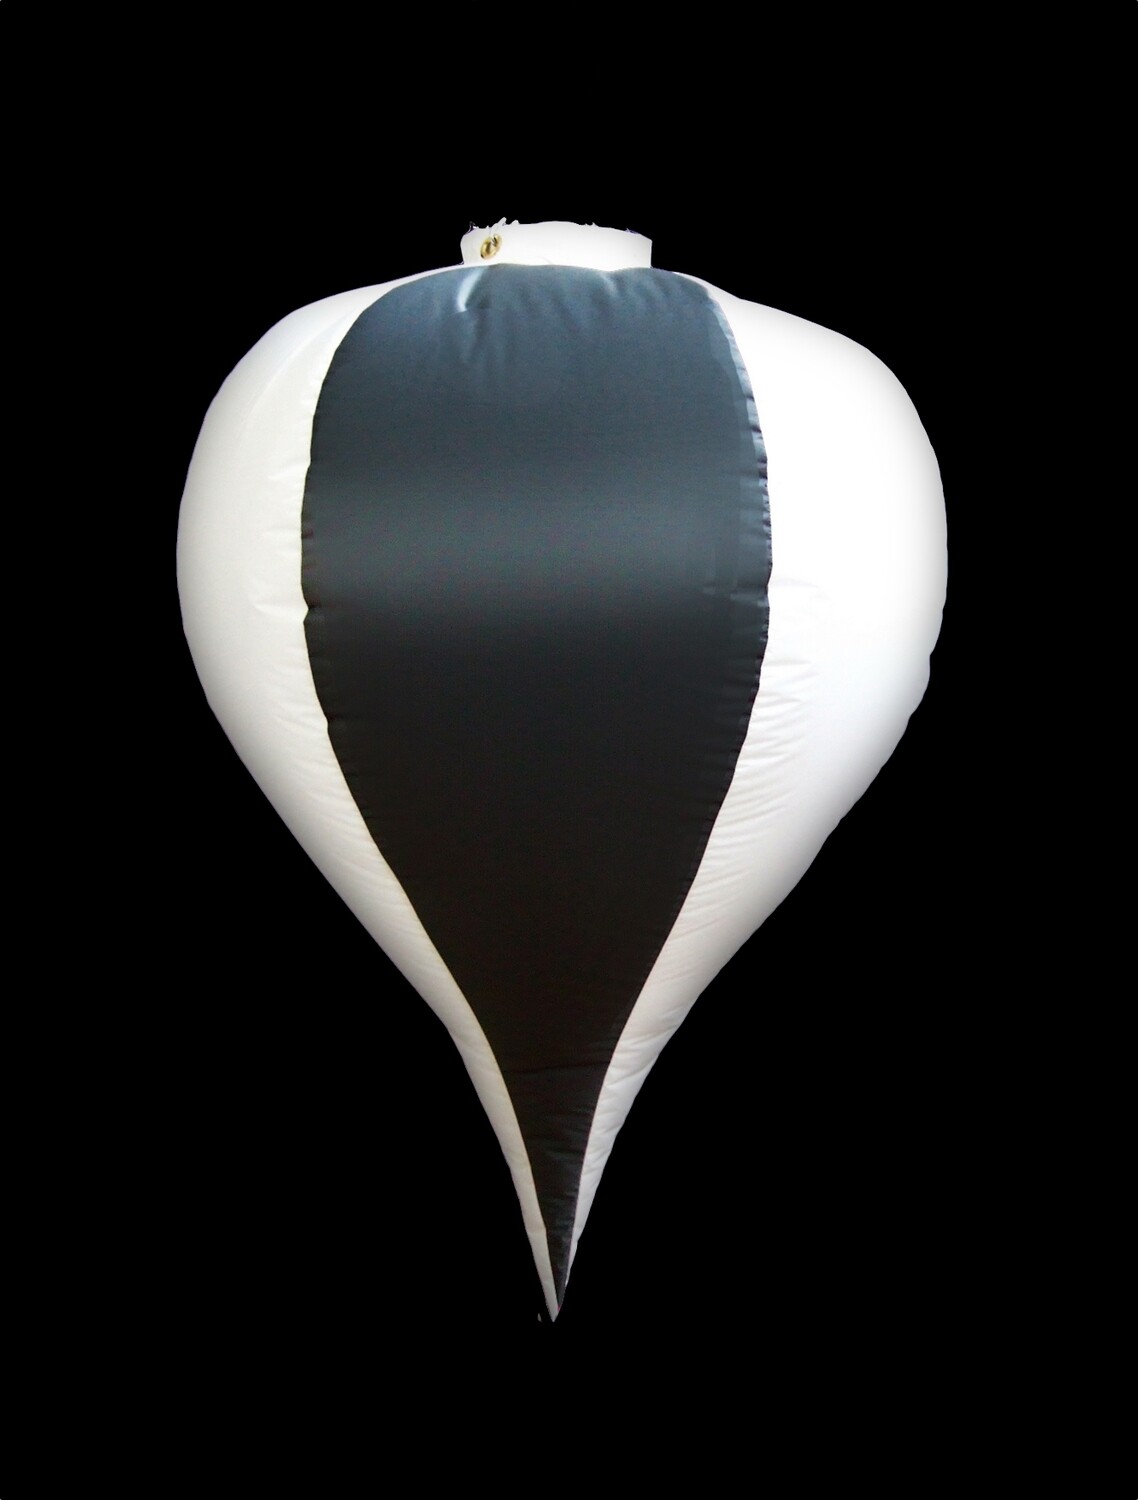 Hanging Inflatable Bauble #1- 3.7ft/113cm x 5ft/152cm